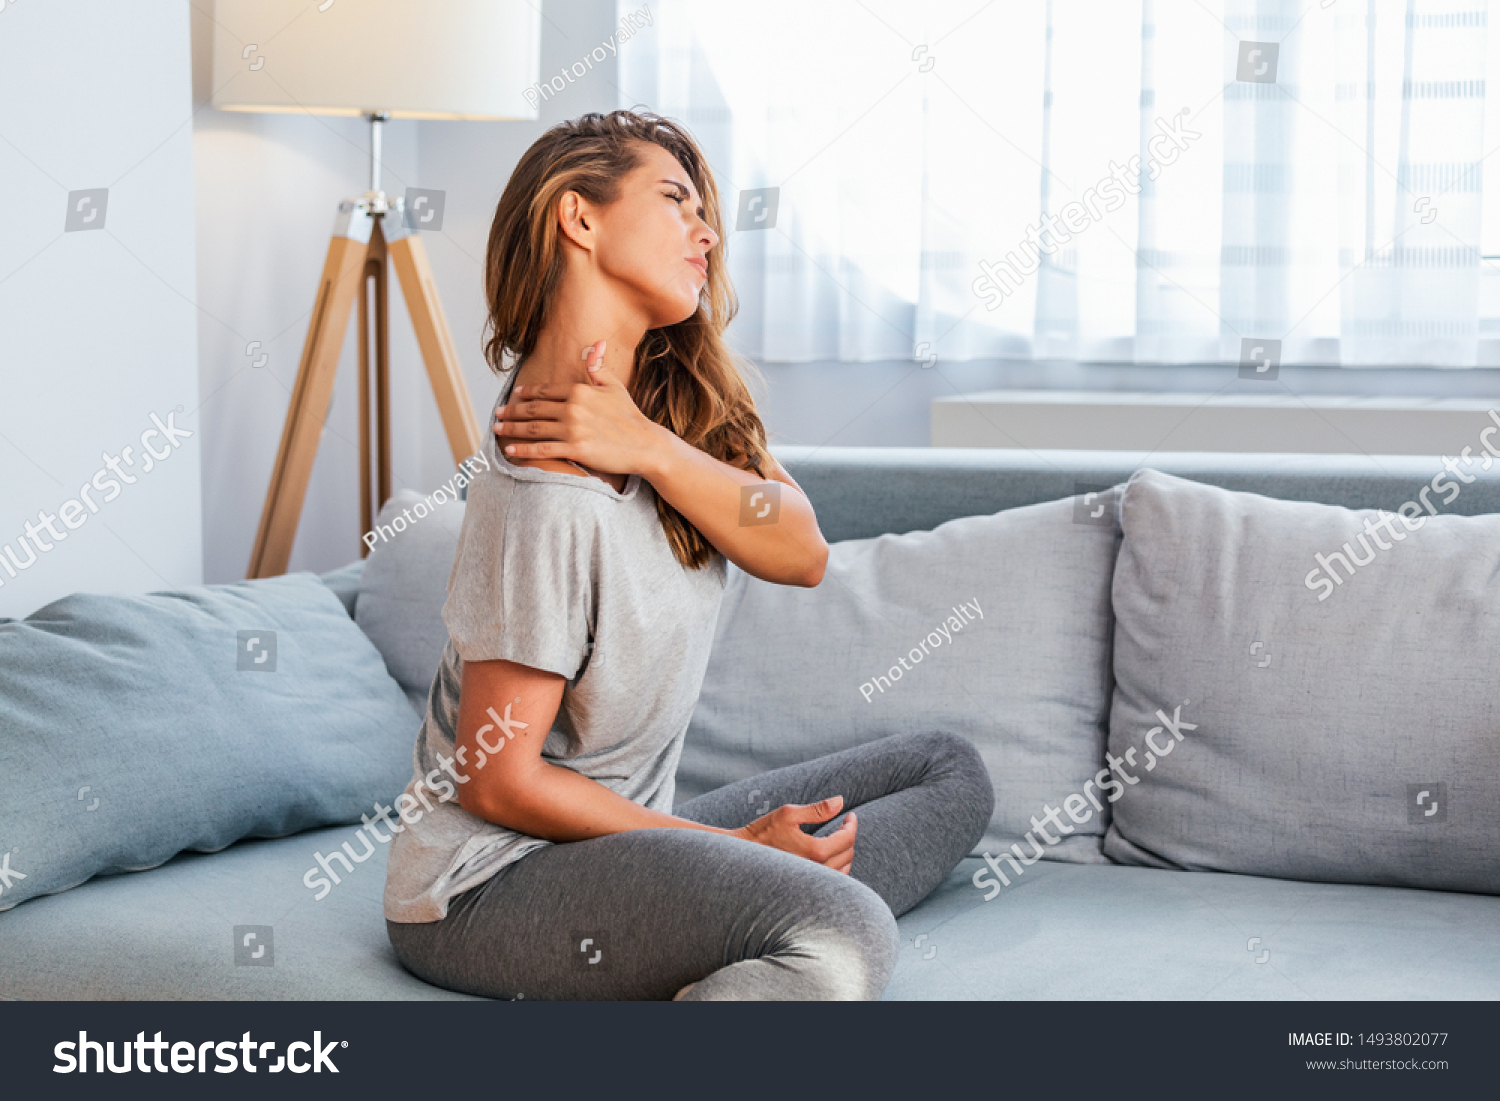 Pain in the shoulder. Upper arm pain, People with body-muscles problem, Healthcare And Medicine concept. Attractive woman sitting on the bed and holding painful shoulder with another hand. #1493802077